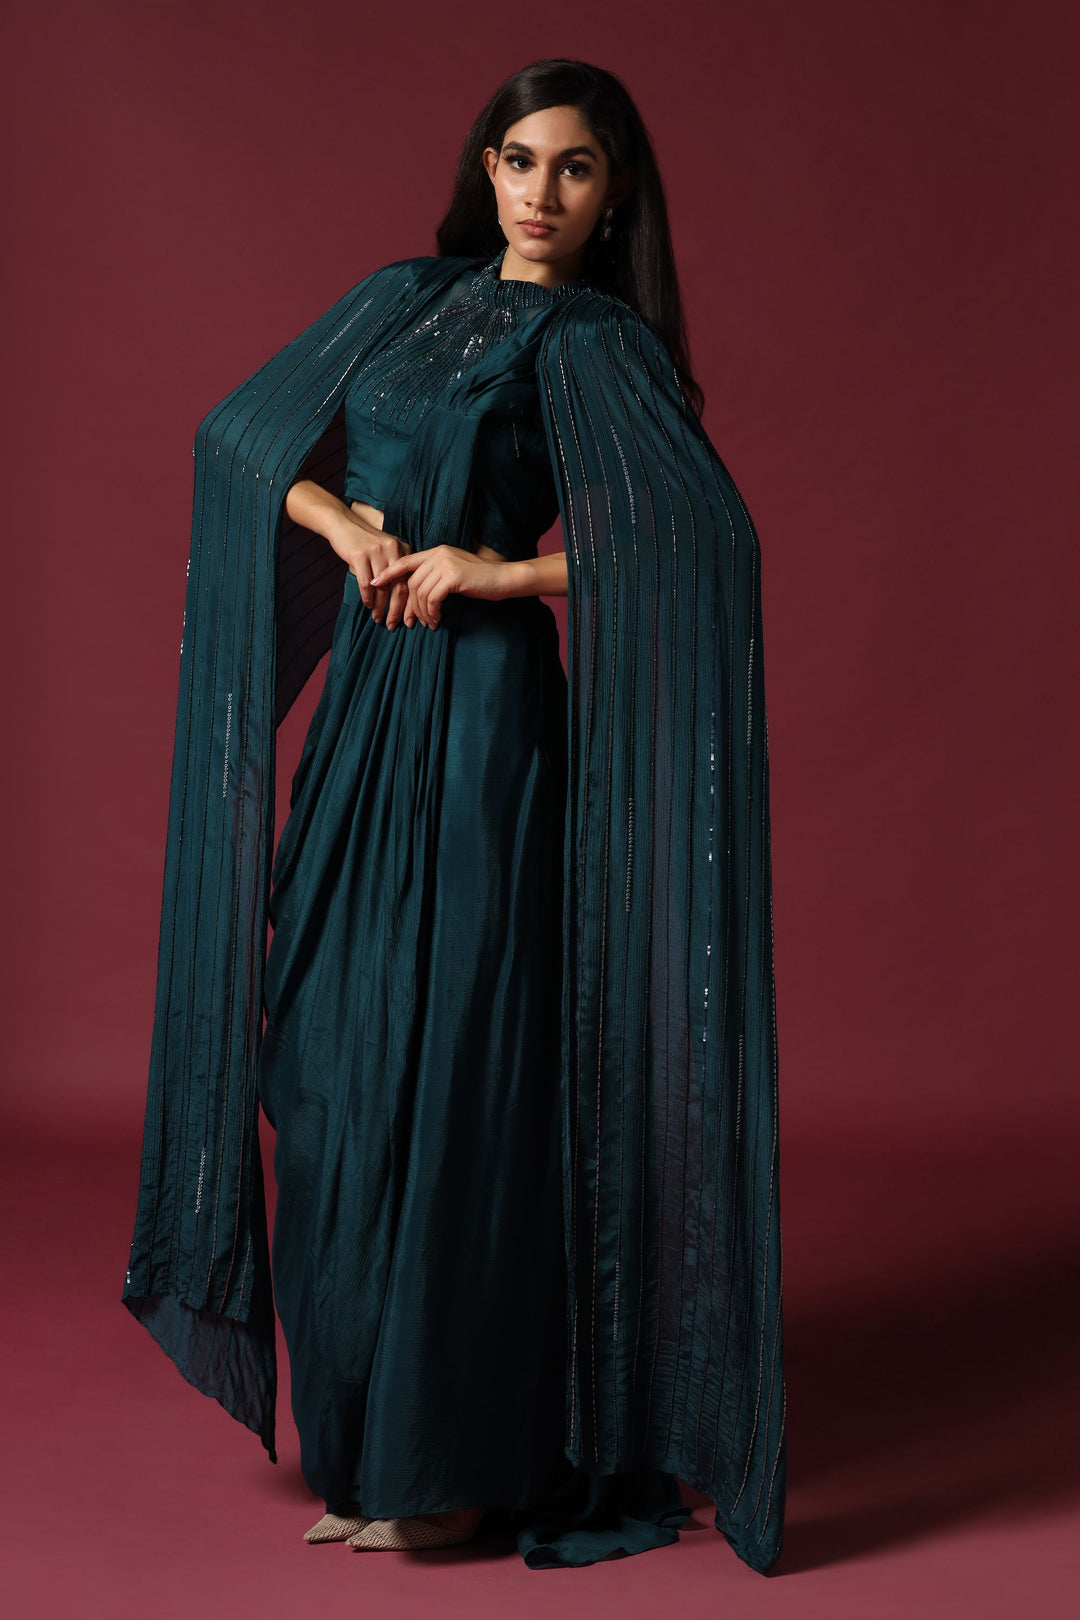 Teal Green Pre-Draped Saree with A Shoulder Cape